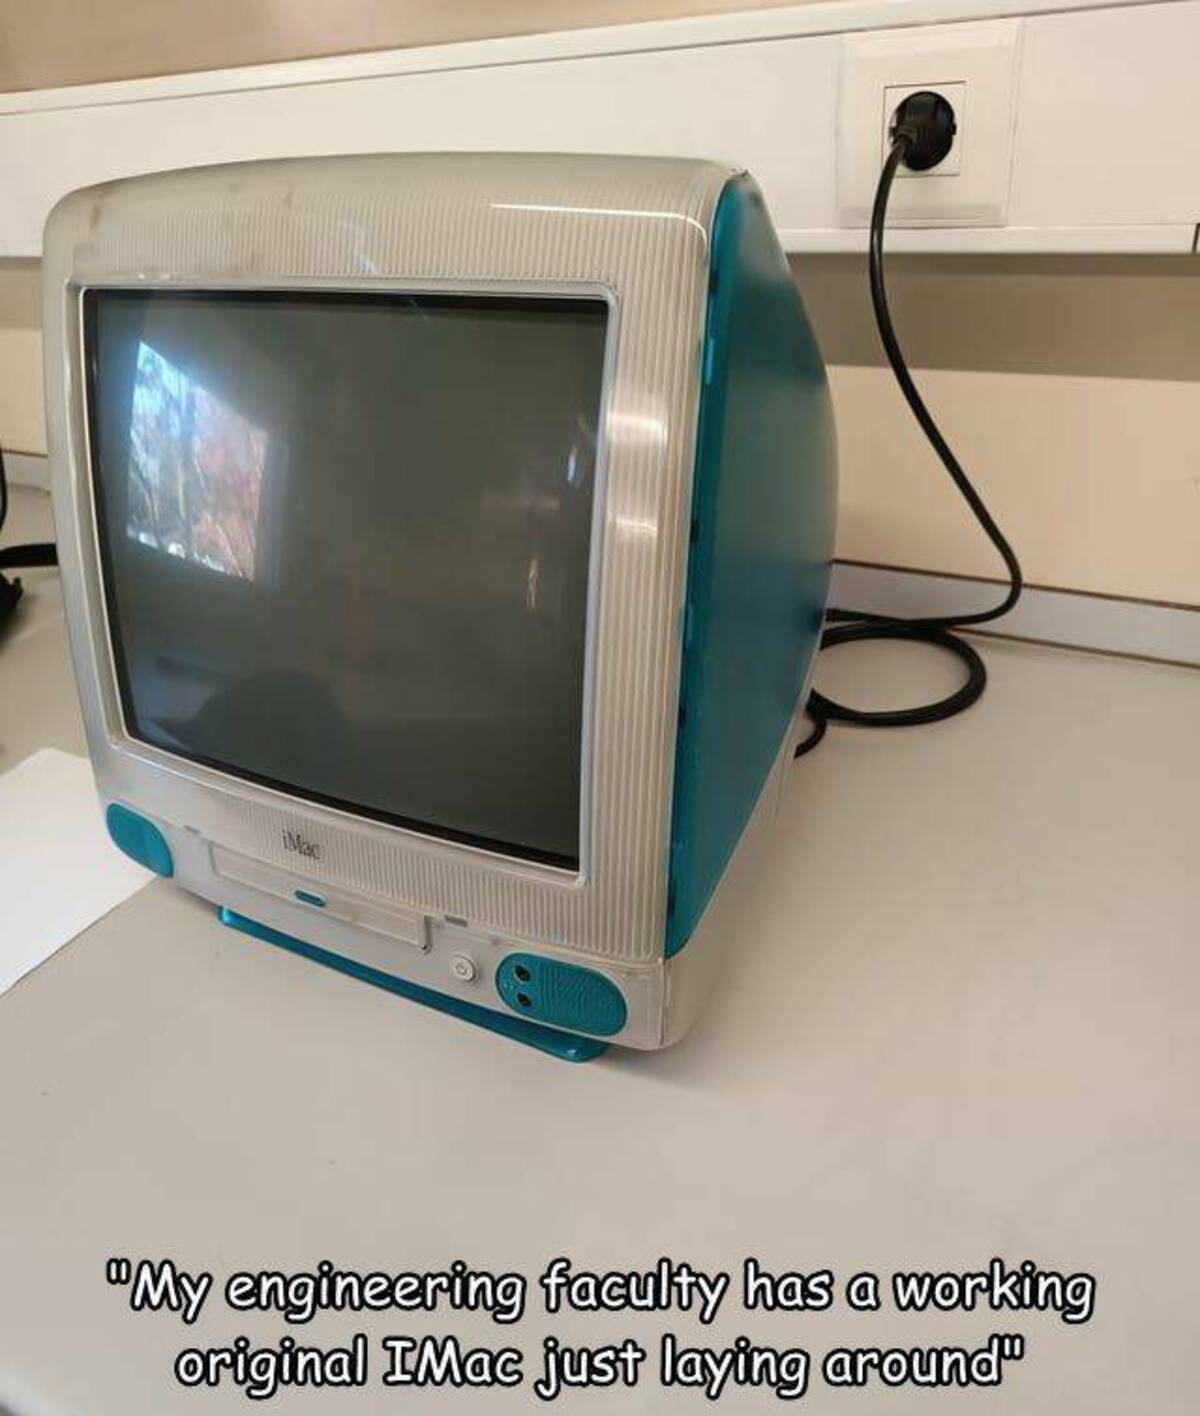 screen - "My engineering faculty has a working original Imac just laying around"